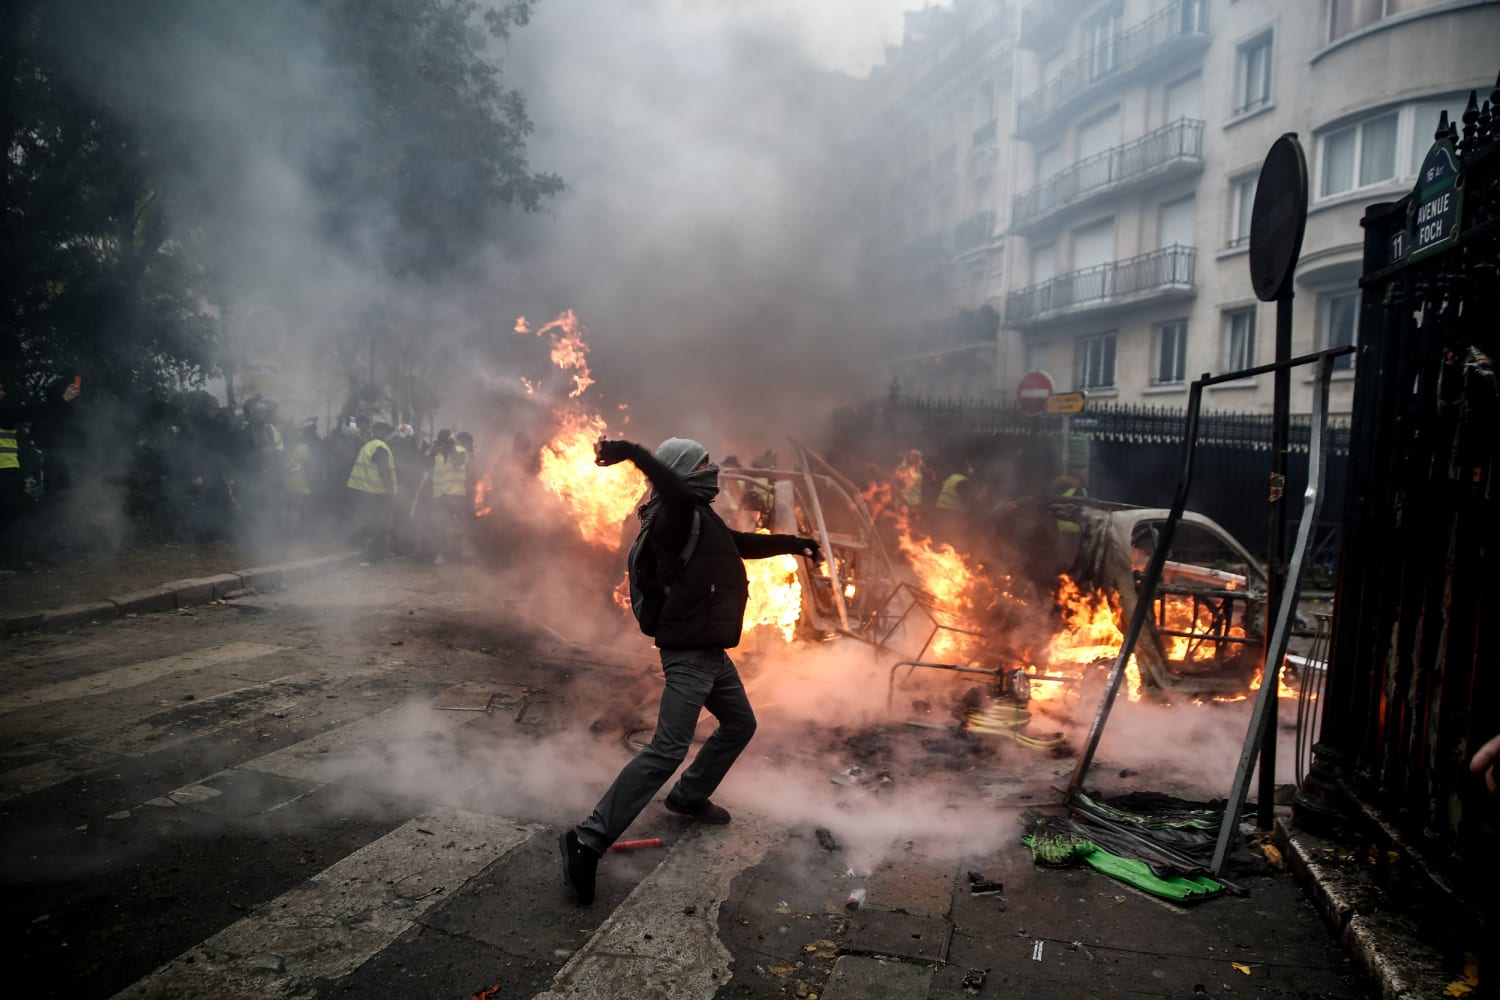 Yellow Jacket' riots rock Paris, leaves 133 injured, 412 arrested